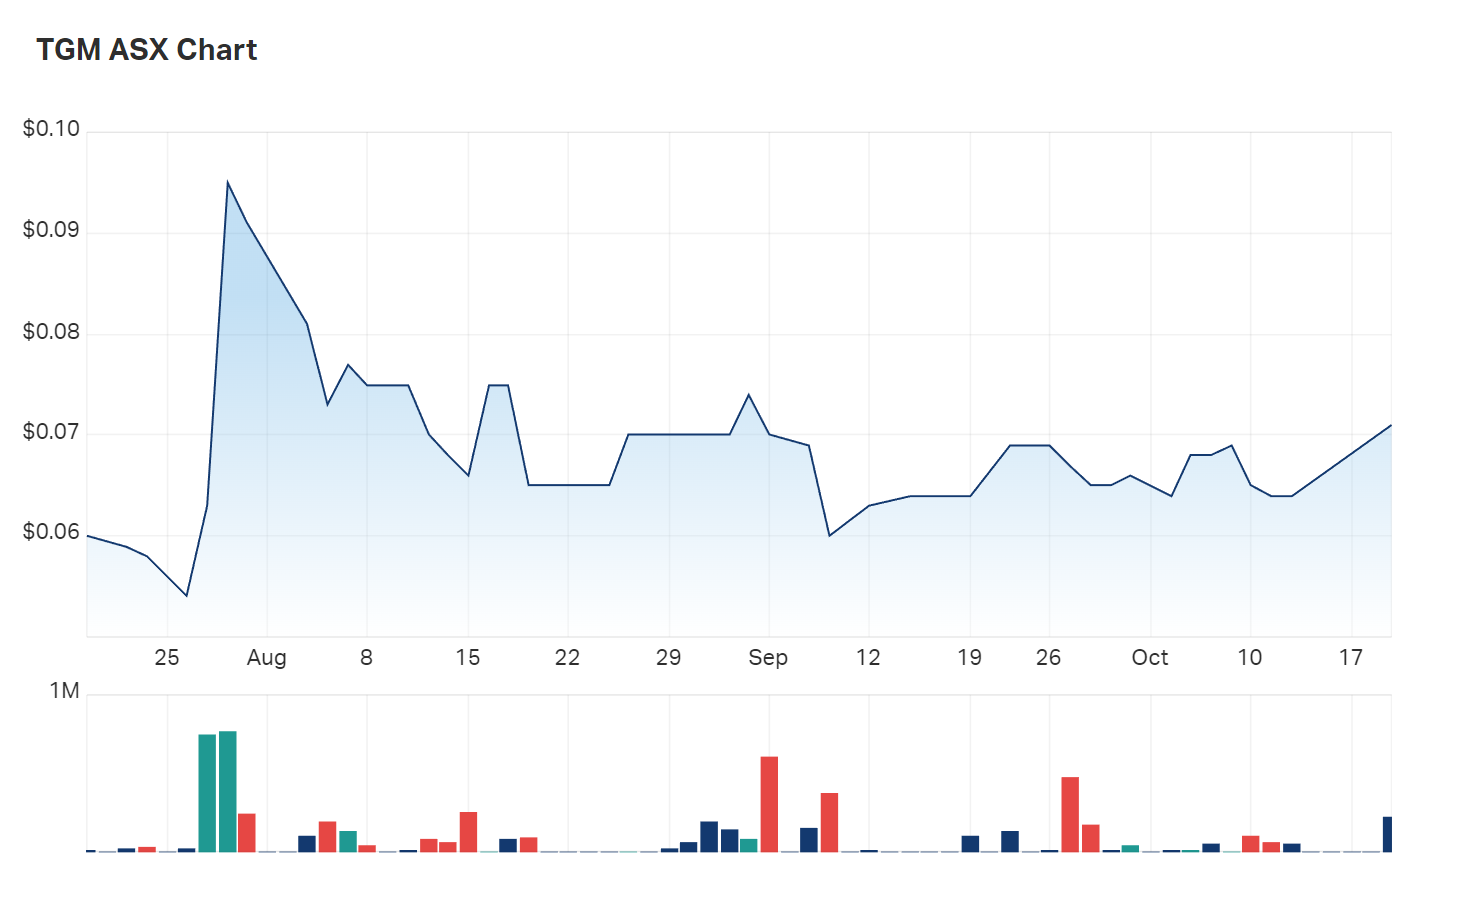 Theta Gold Mines' three month charts show a boost in shareholder sentiment today